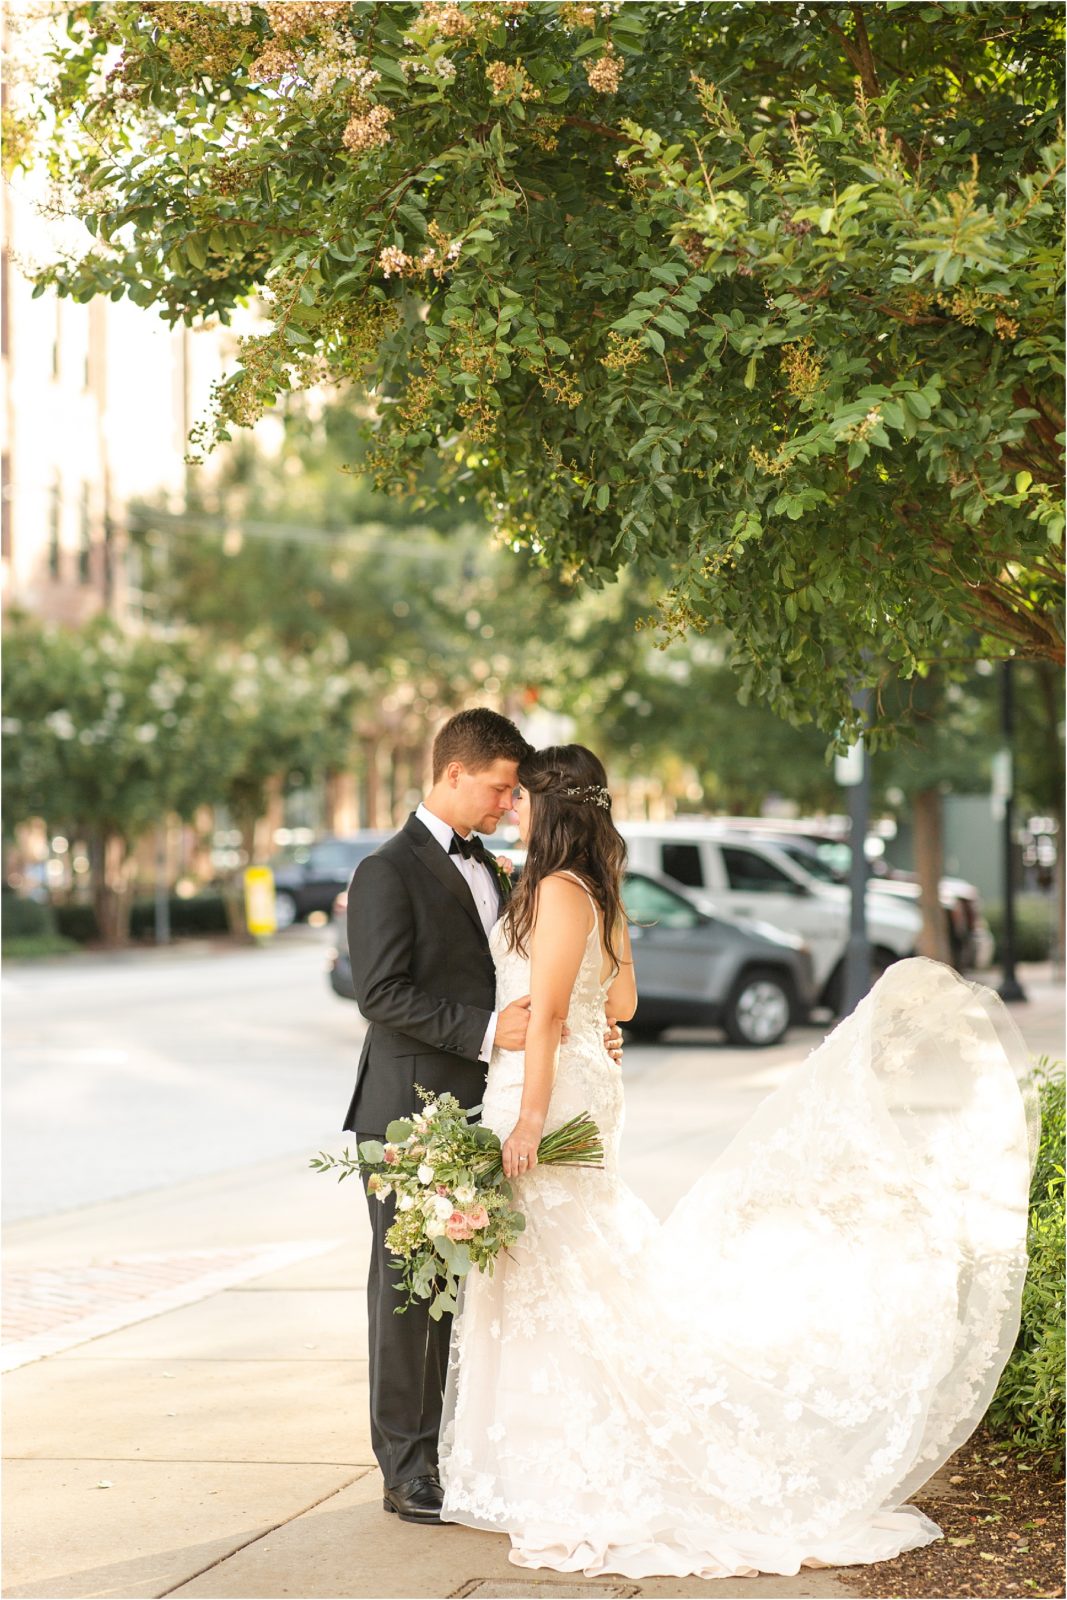 Man in tux and woman in wedding gown standing in Downtown Greenville